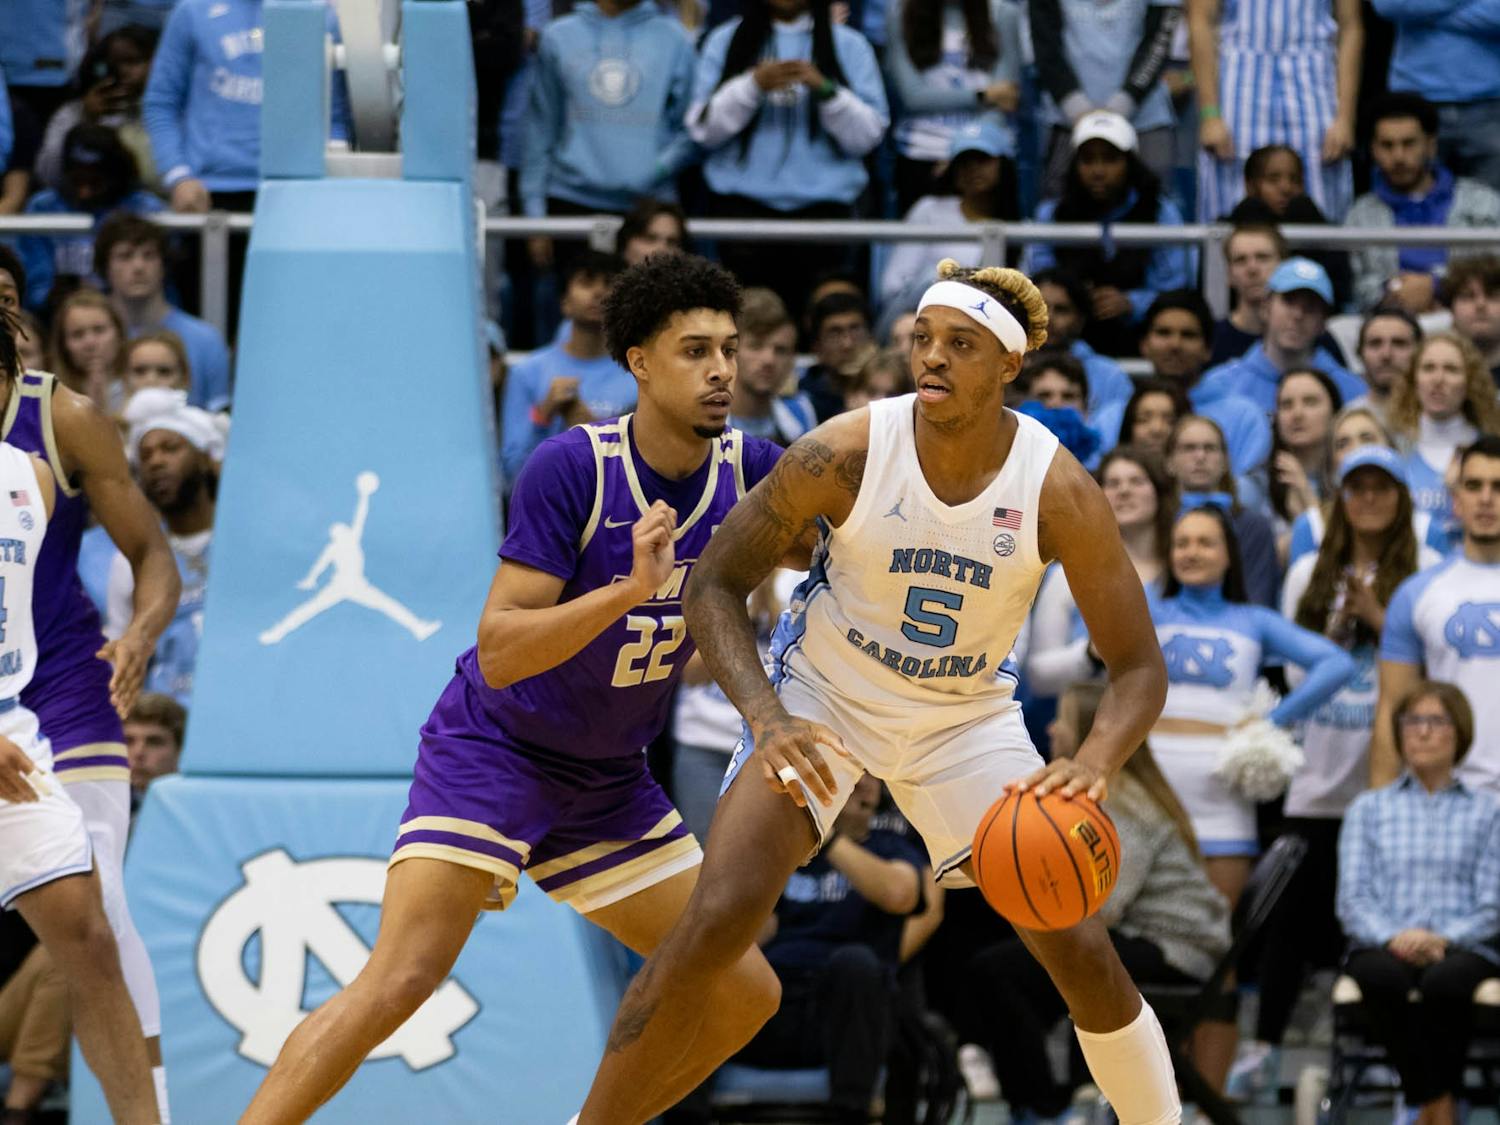 UNC senior Armando Bacot (5) looks to pass during the men's basketball game on Sunday, Nov. 20, 2022, at the Dean Smith Center. UNC beat JMU 80-64.